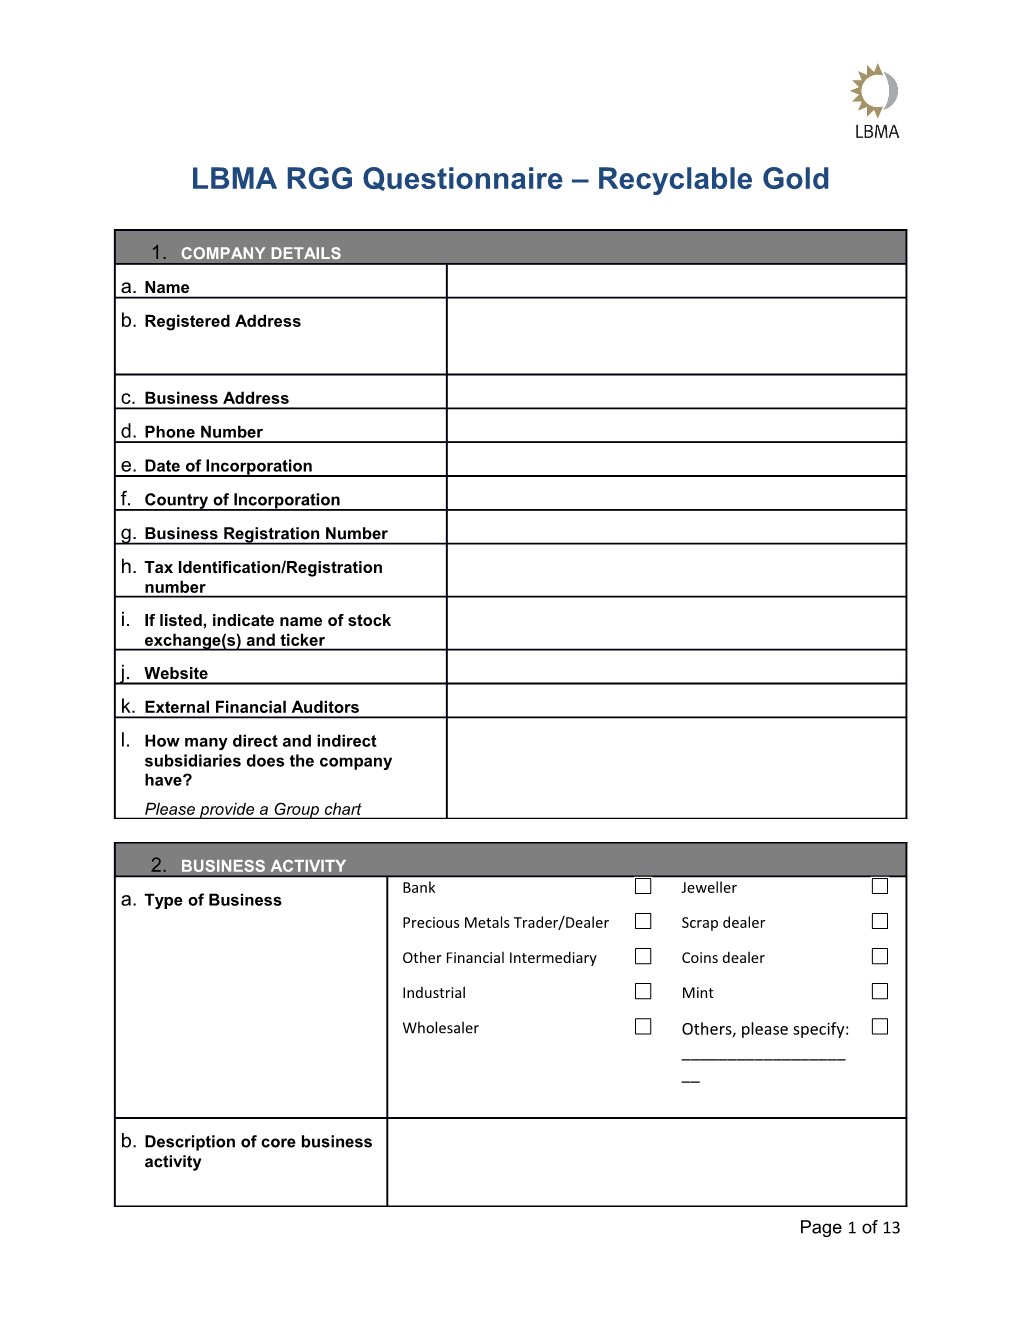 LBMA RGG Questionnaire Recyclable Gold